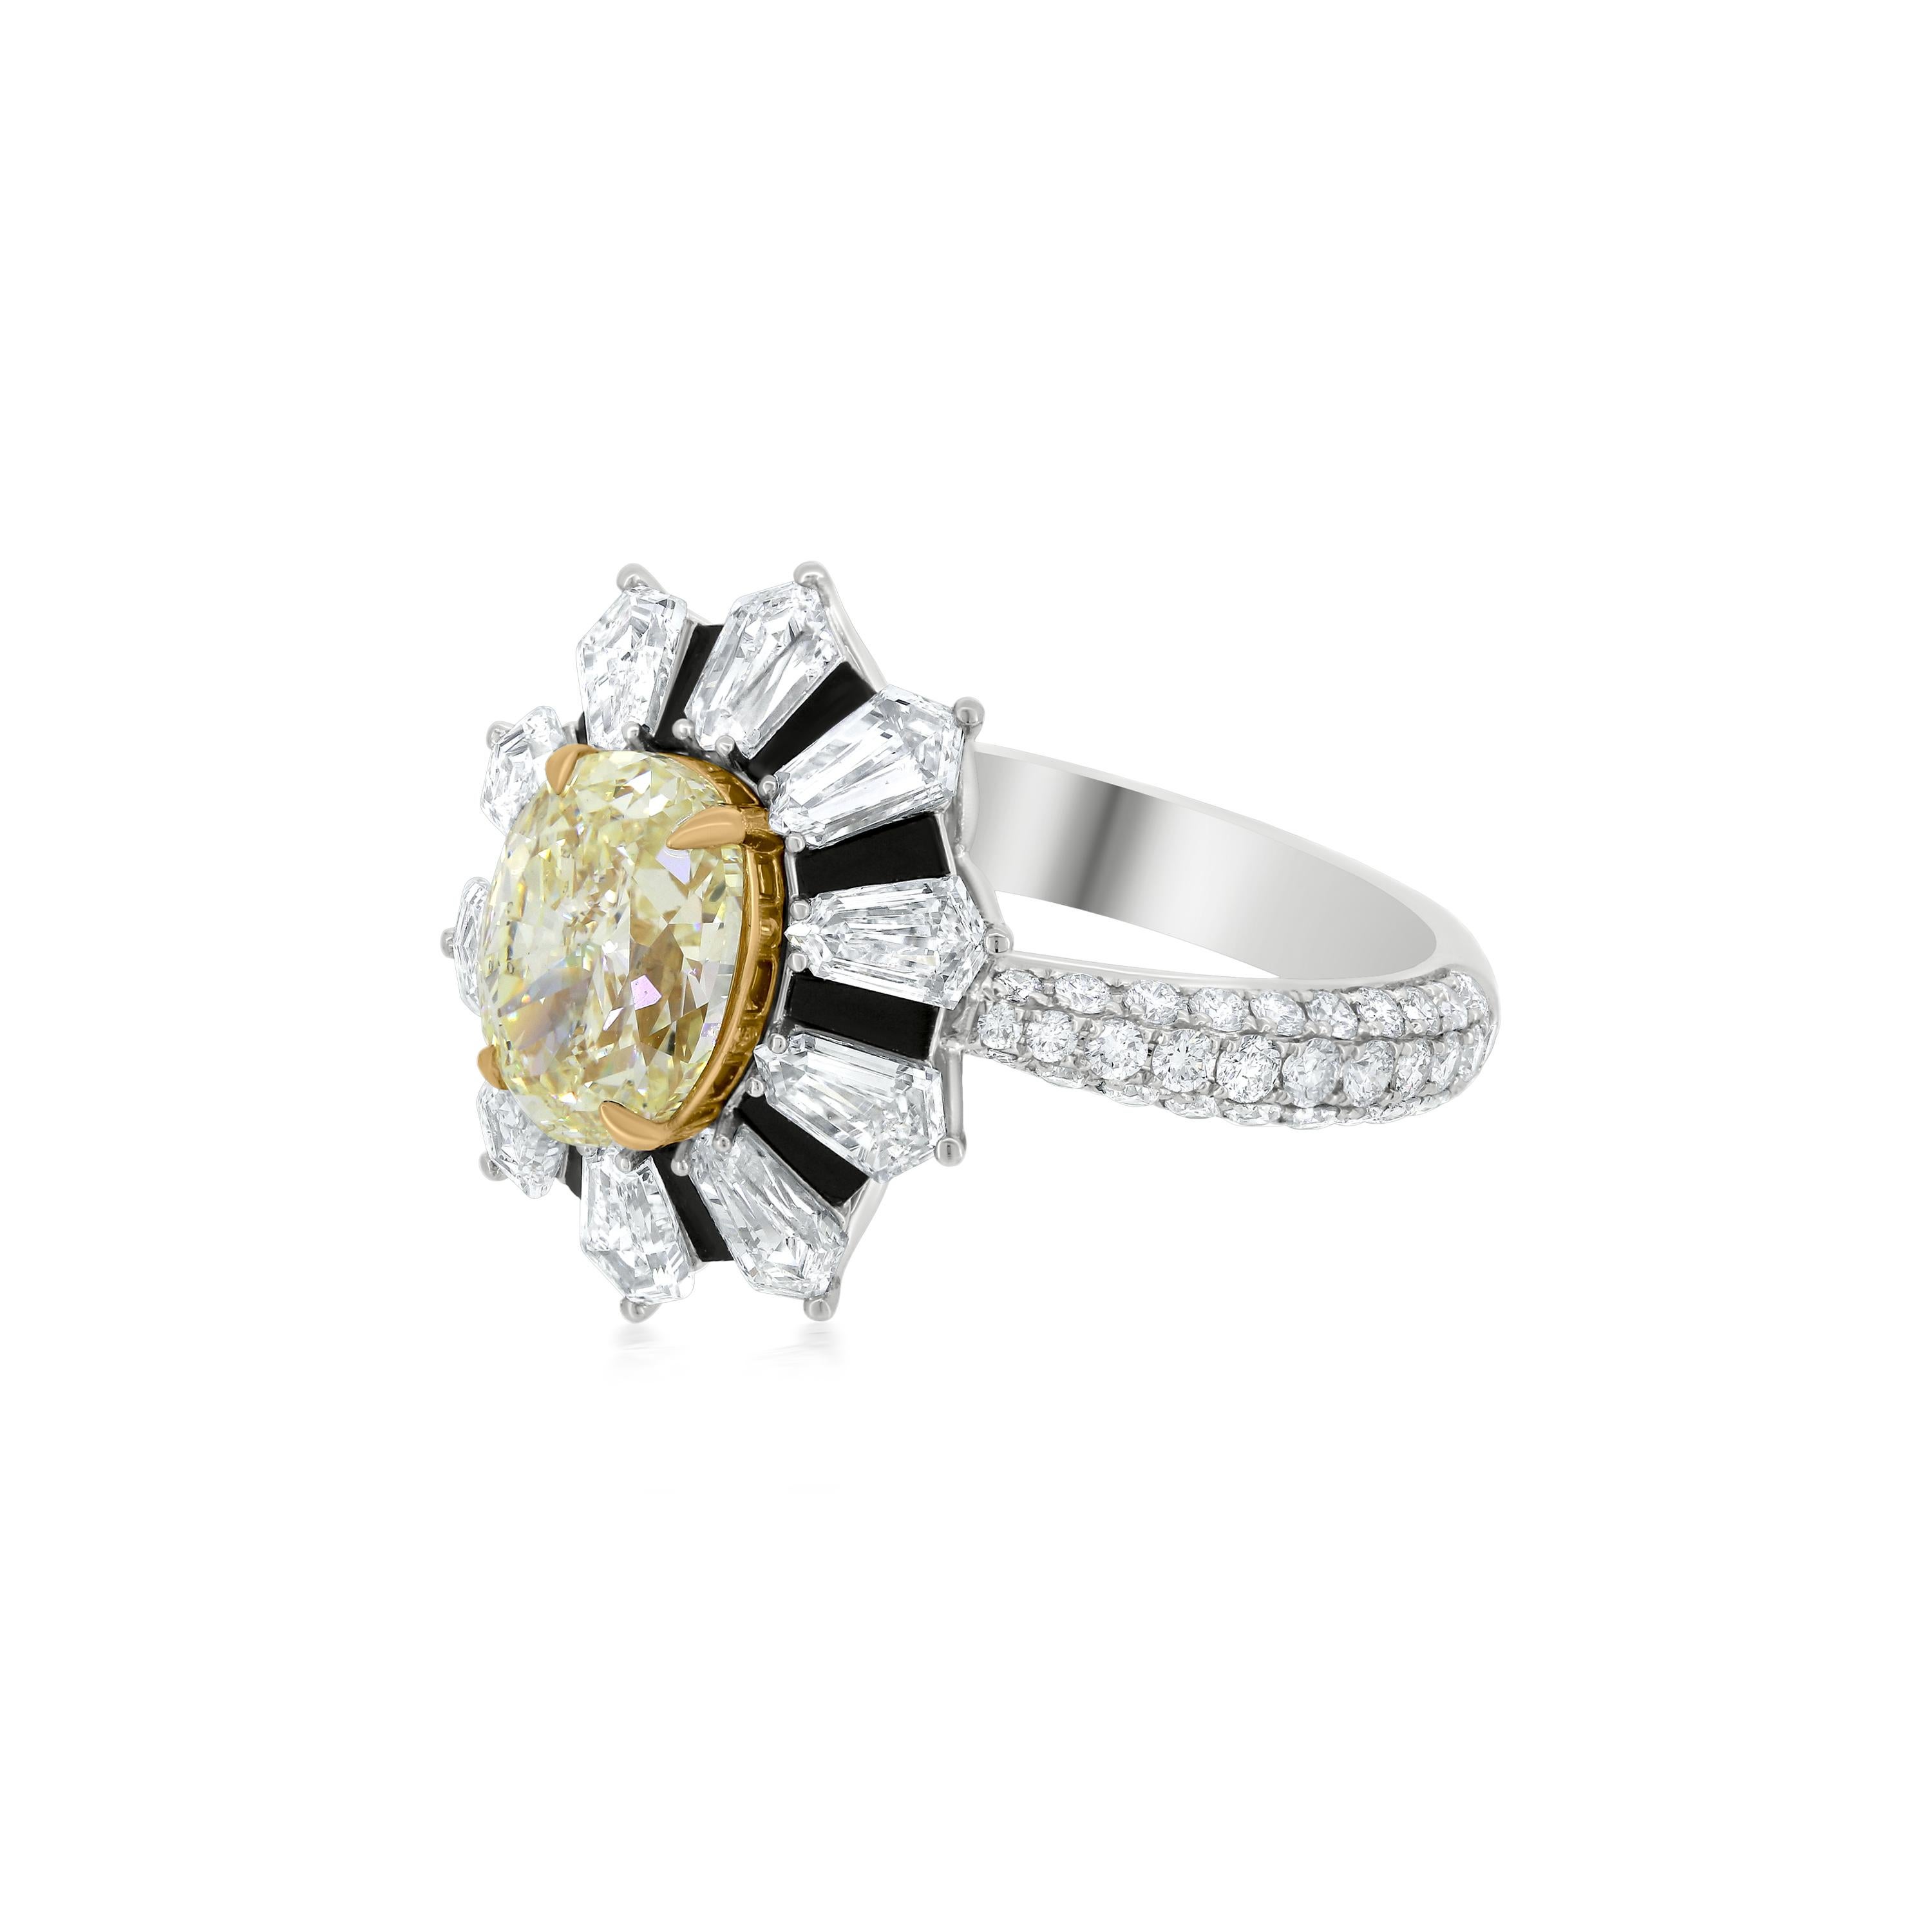 Contemporary Nigaam 4.6cttw, Yellow and White Diamond Cocktail Ring in 18k White Gold